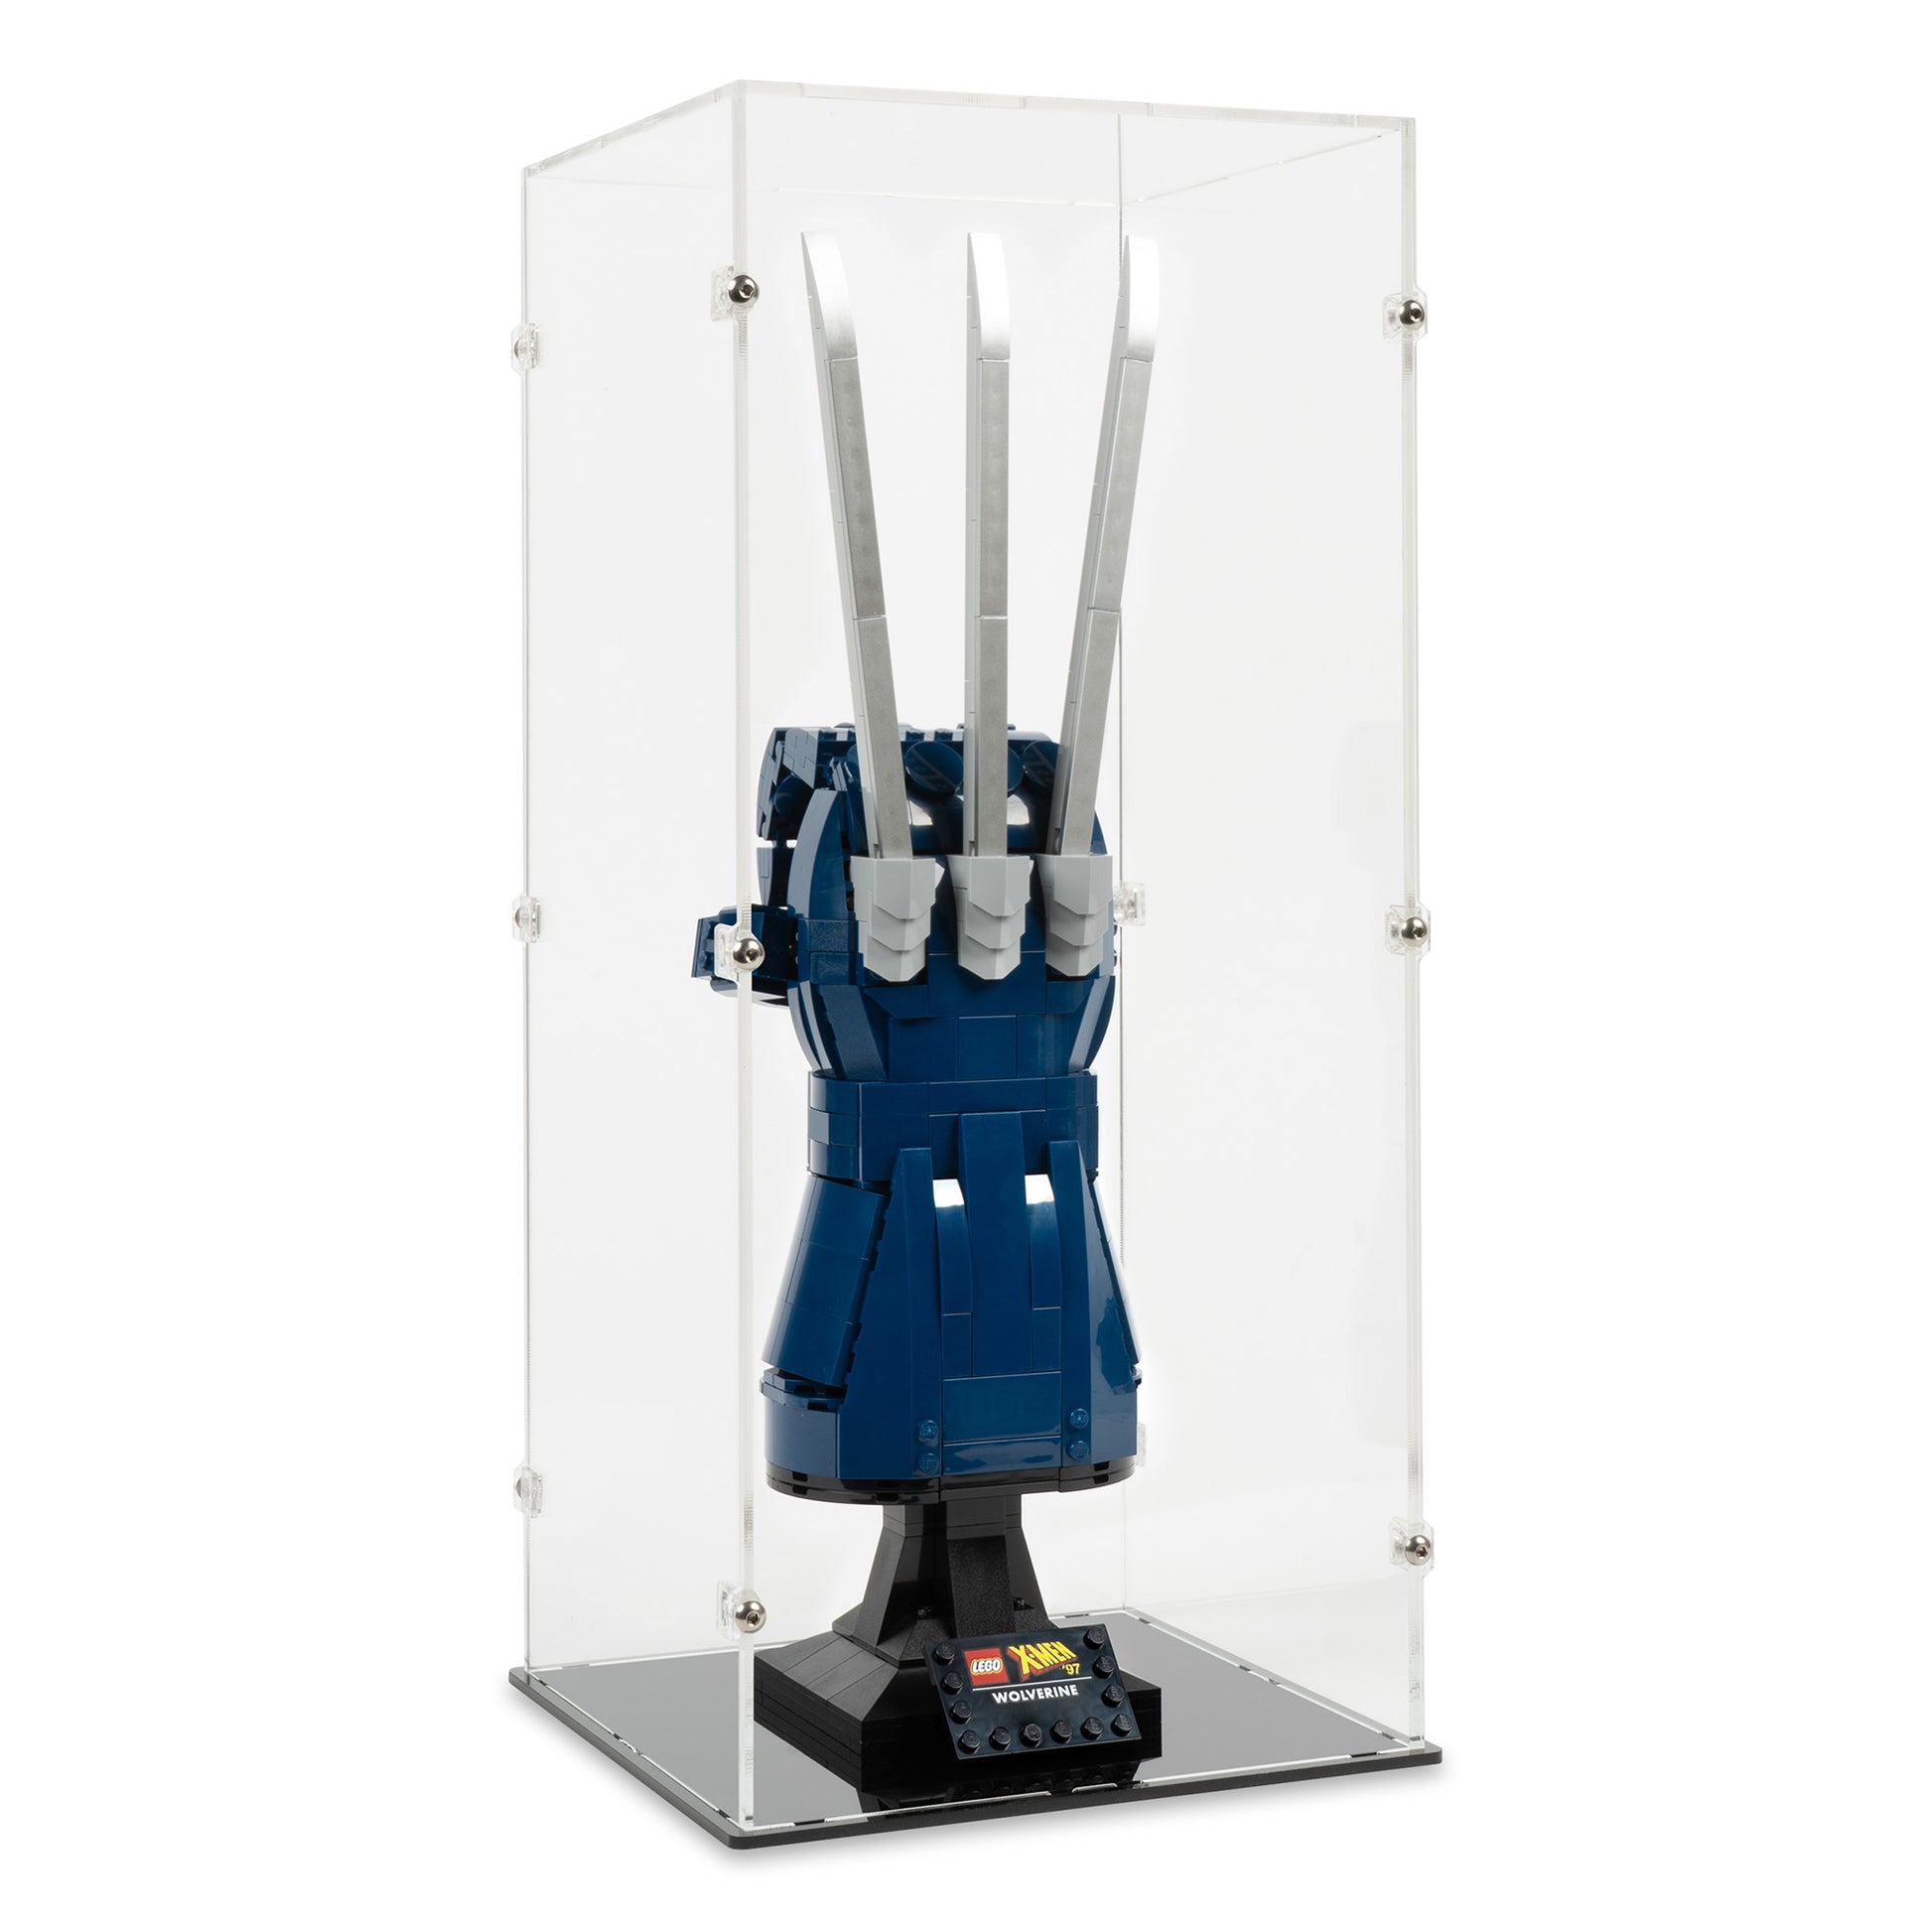 Left angled view of LEGO 76250 Wolverine's Adamantium Claws Display Case.